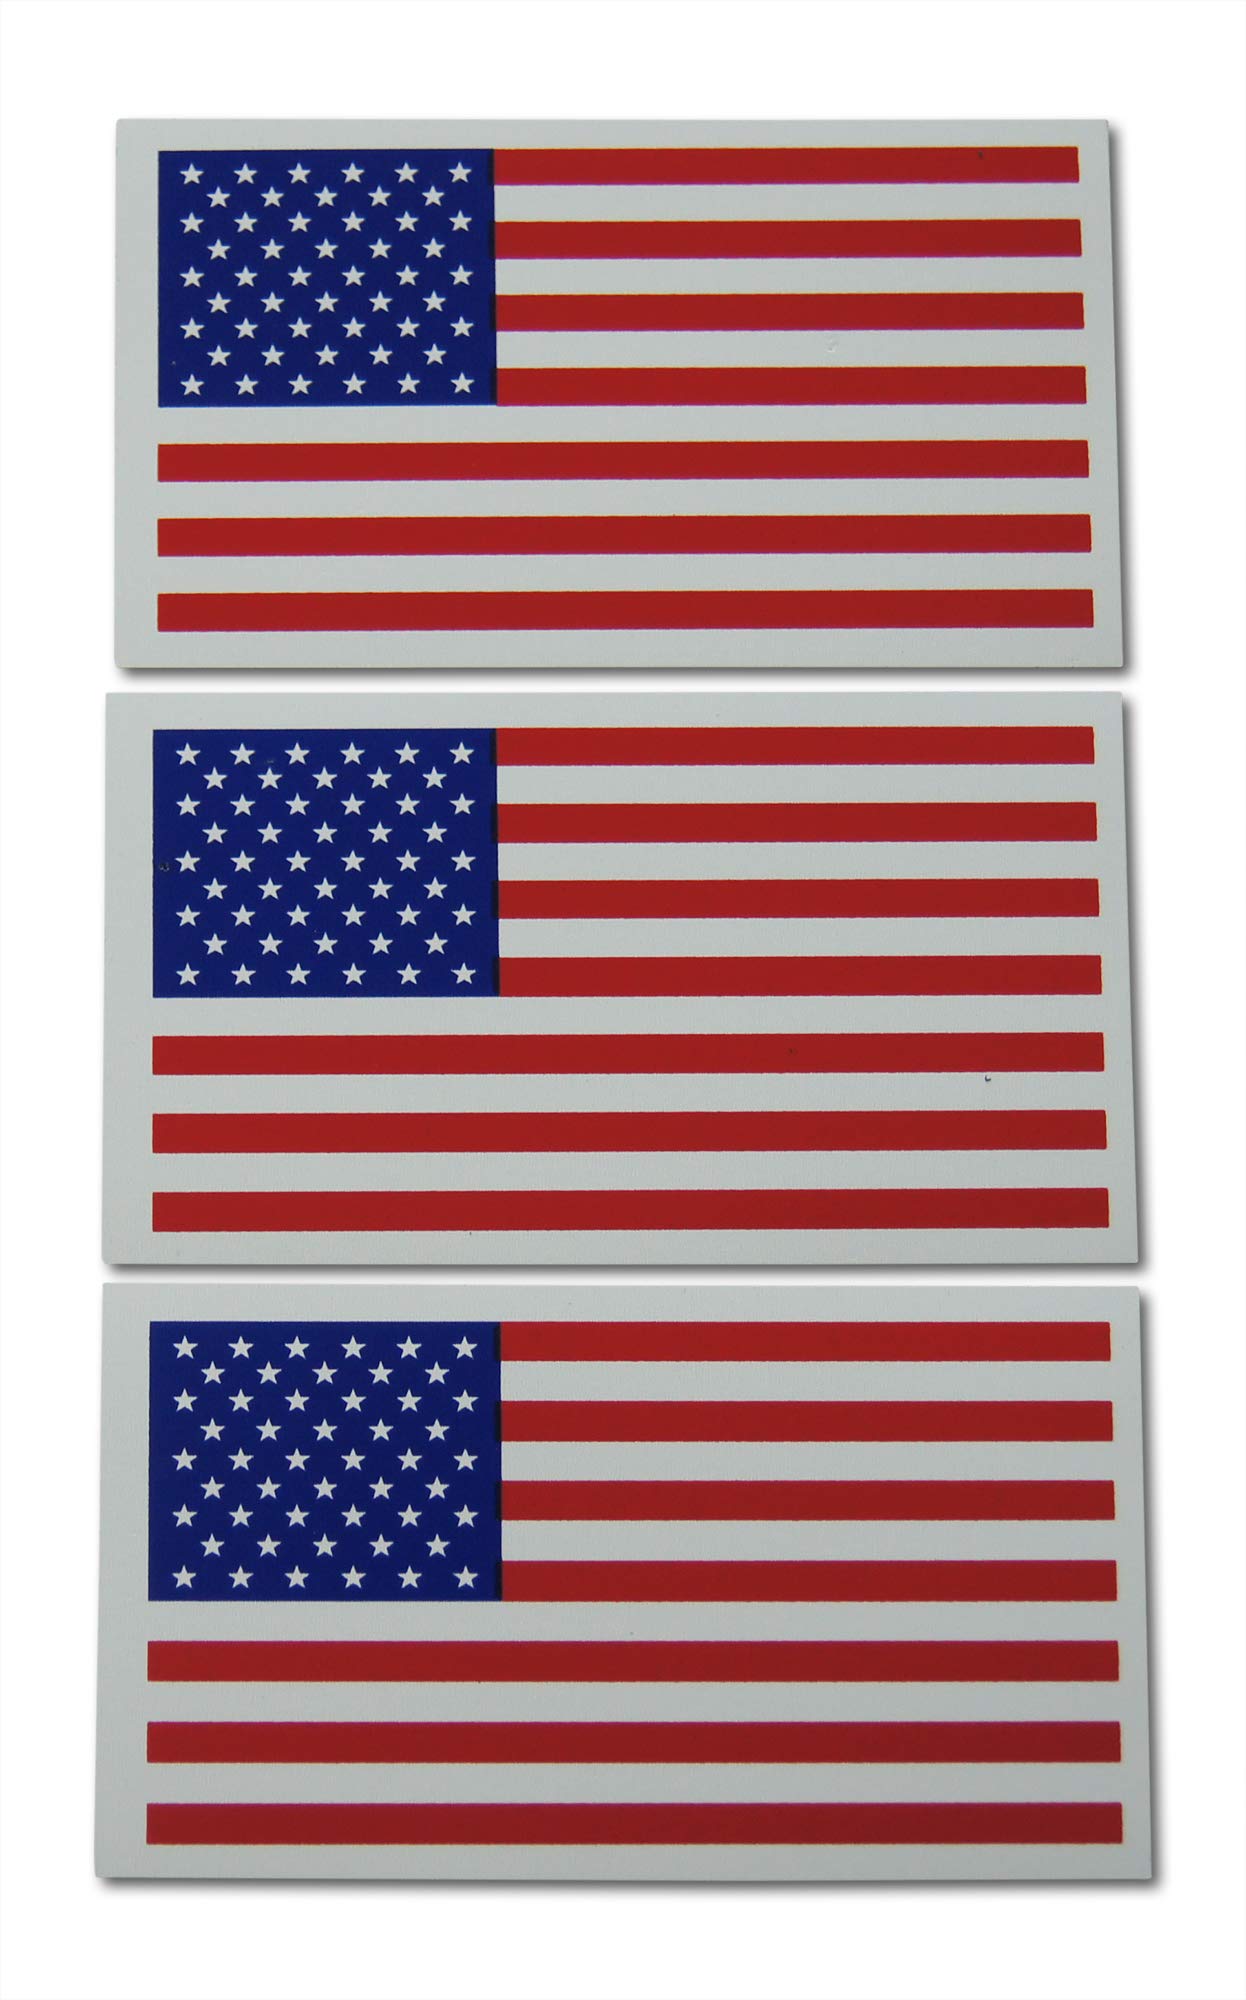 Small American Flag Patriotic Military Magnets Set Mini Rectangles in Classic Red, White, & Blue US Design (3 Pieces)